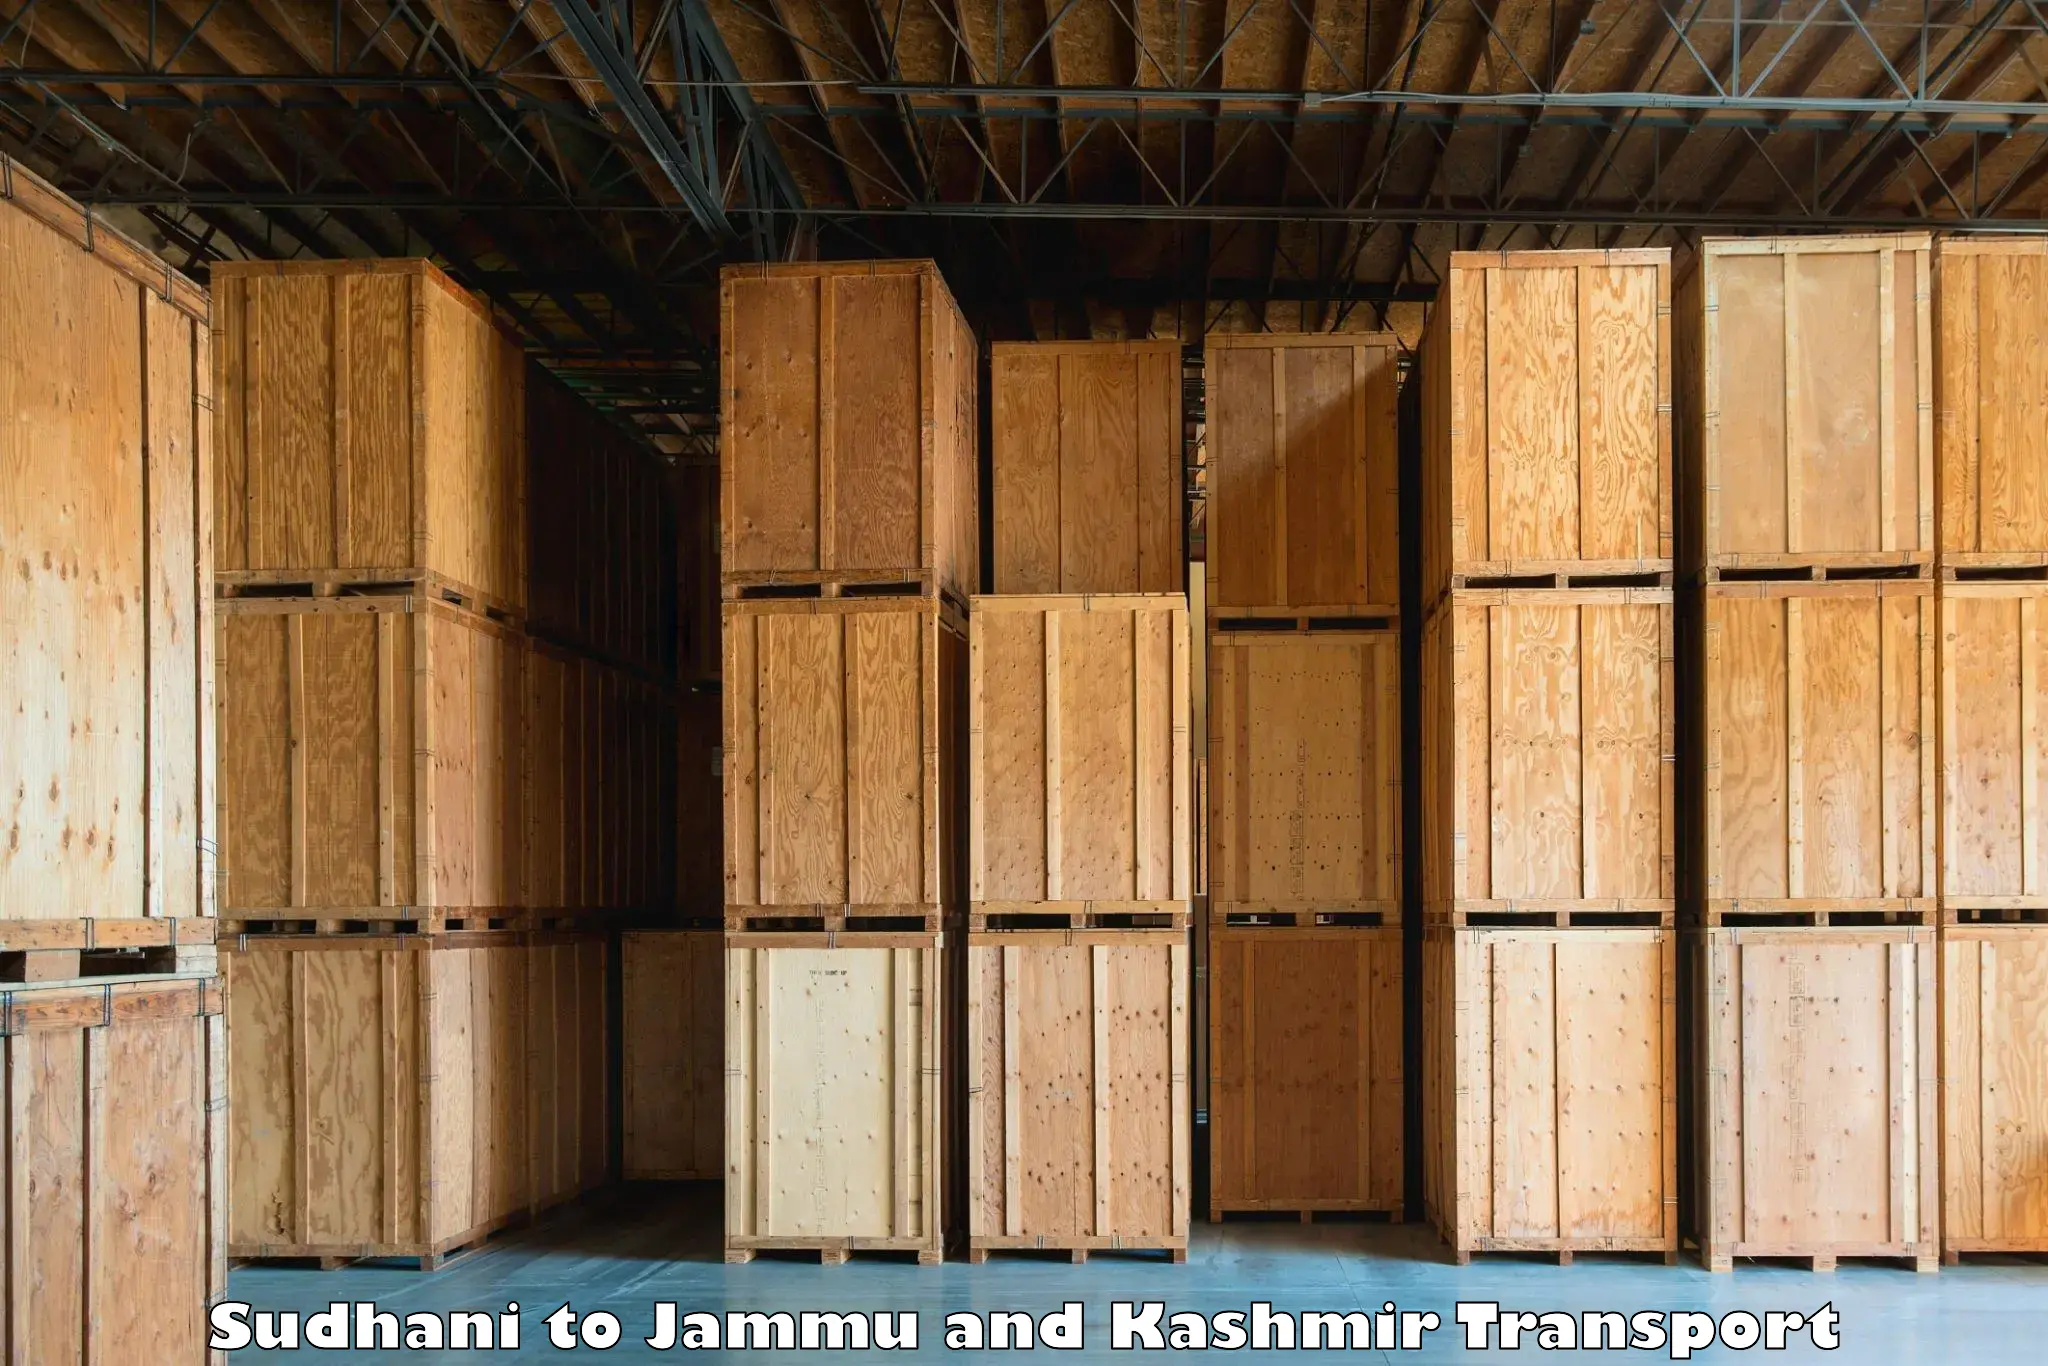 Truck transport companies in India Sudhani to Jammu and Kashmir